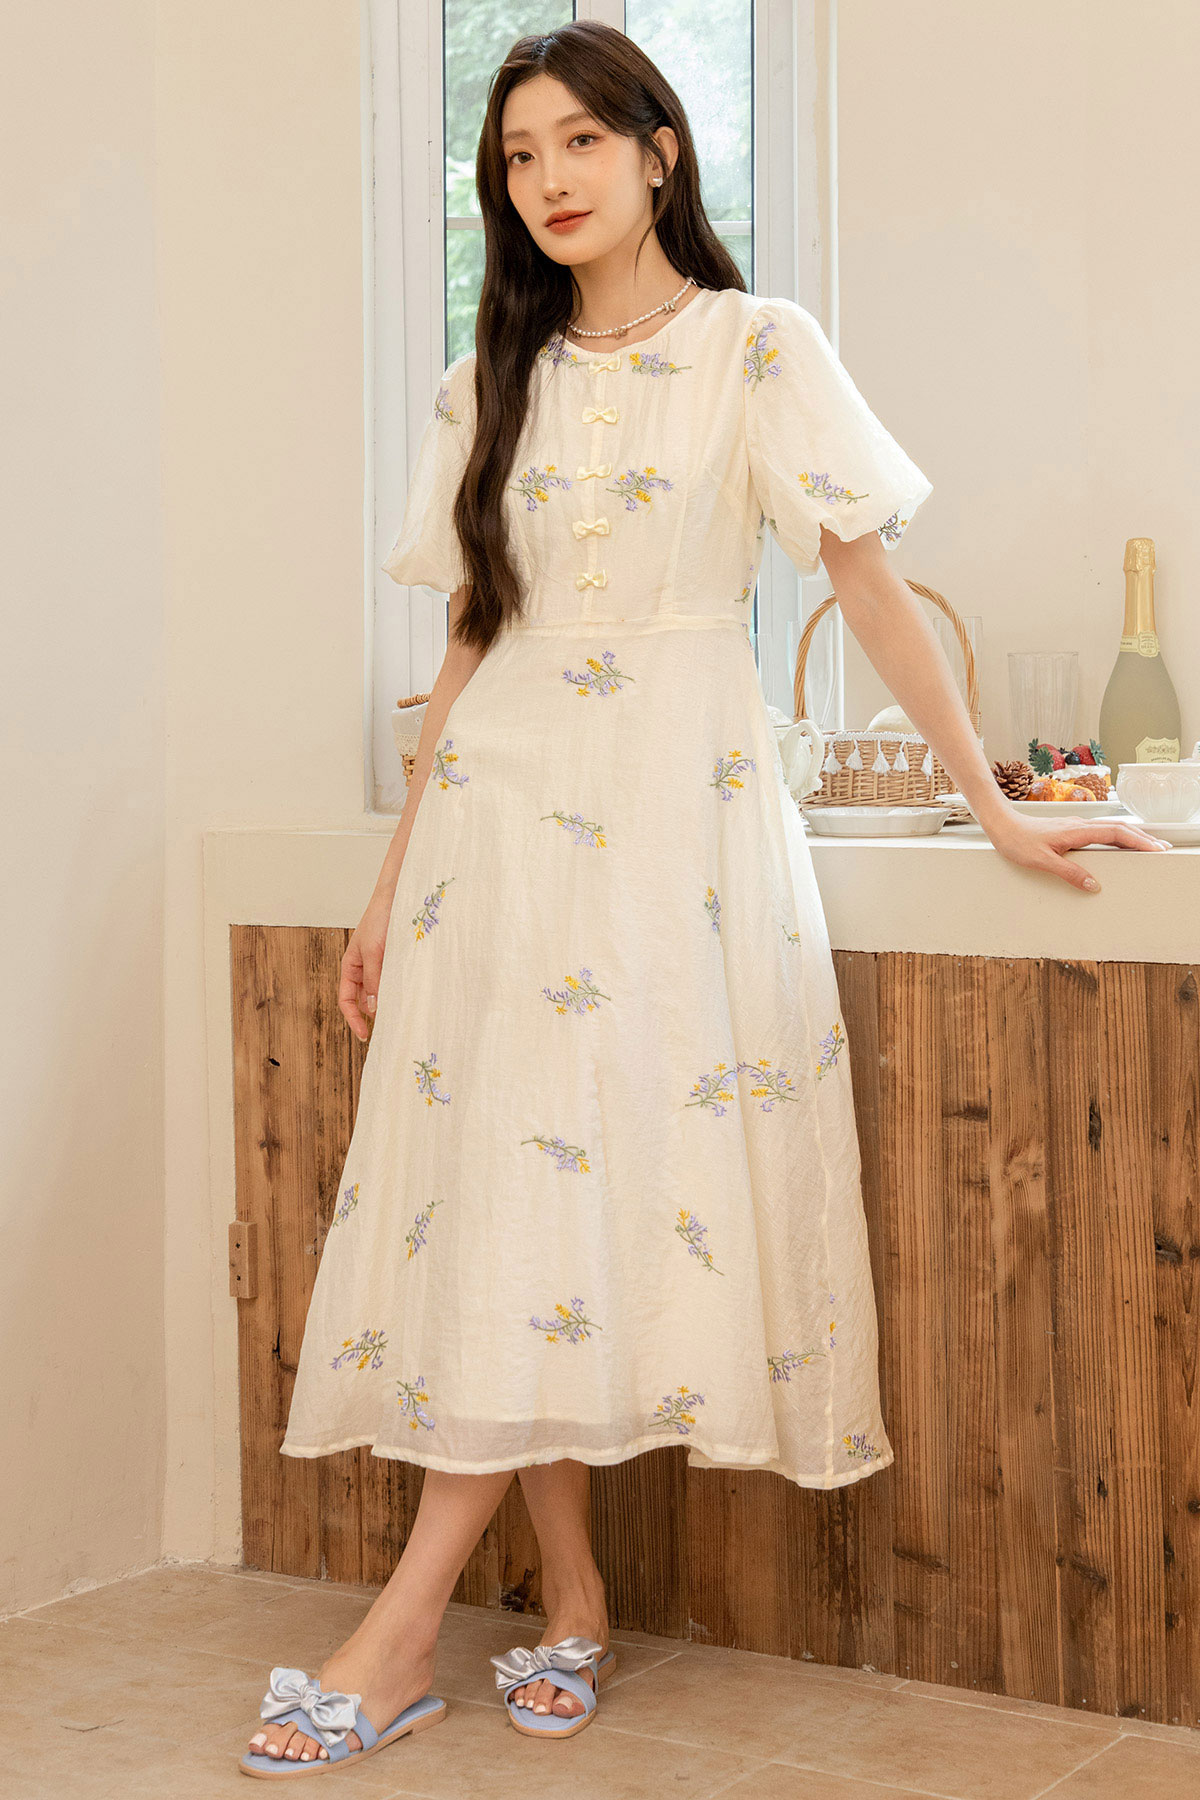 QUINTON DRESS - MEADOWBROOK [BY MODPARADE]